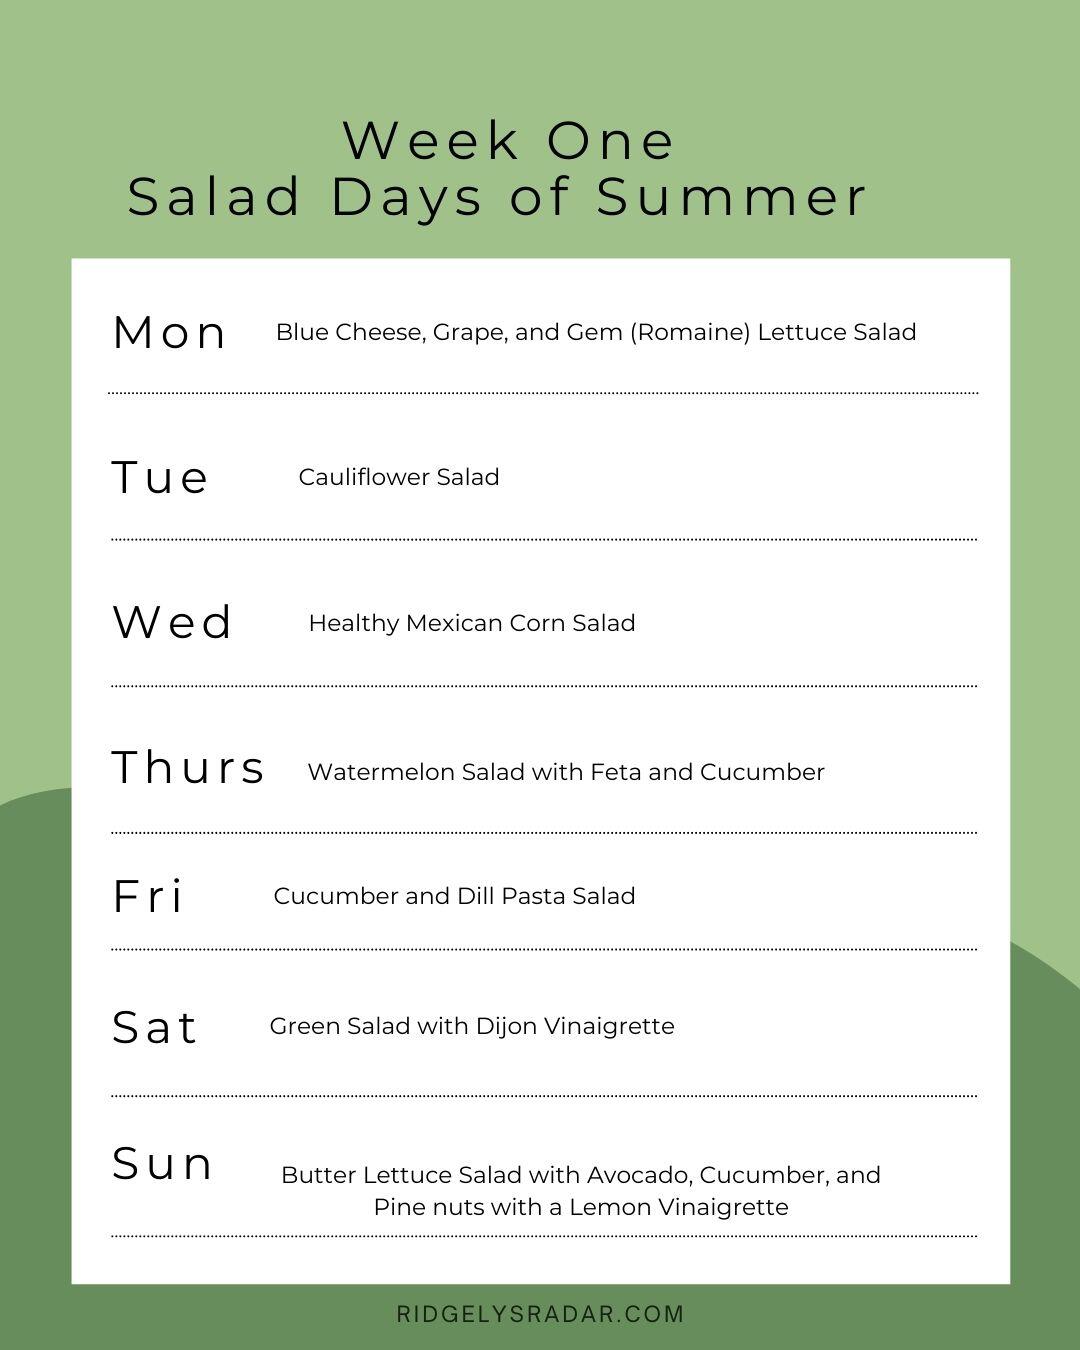 Join the Challenge! Week One of Salad Days of Summer Recipes is here! For the month of July we will be making eating and sharing salad recipes.